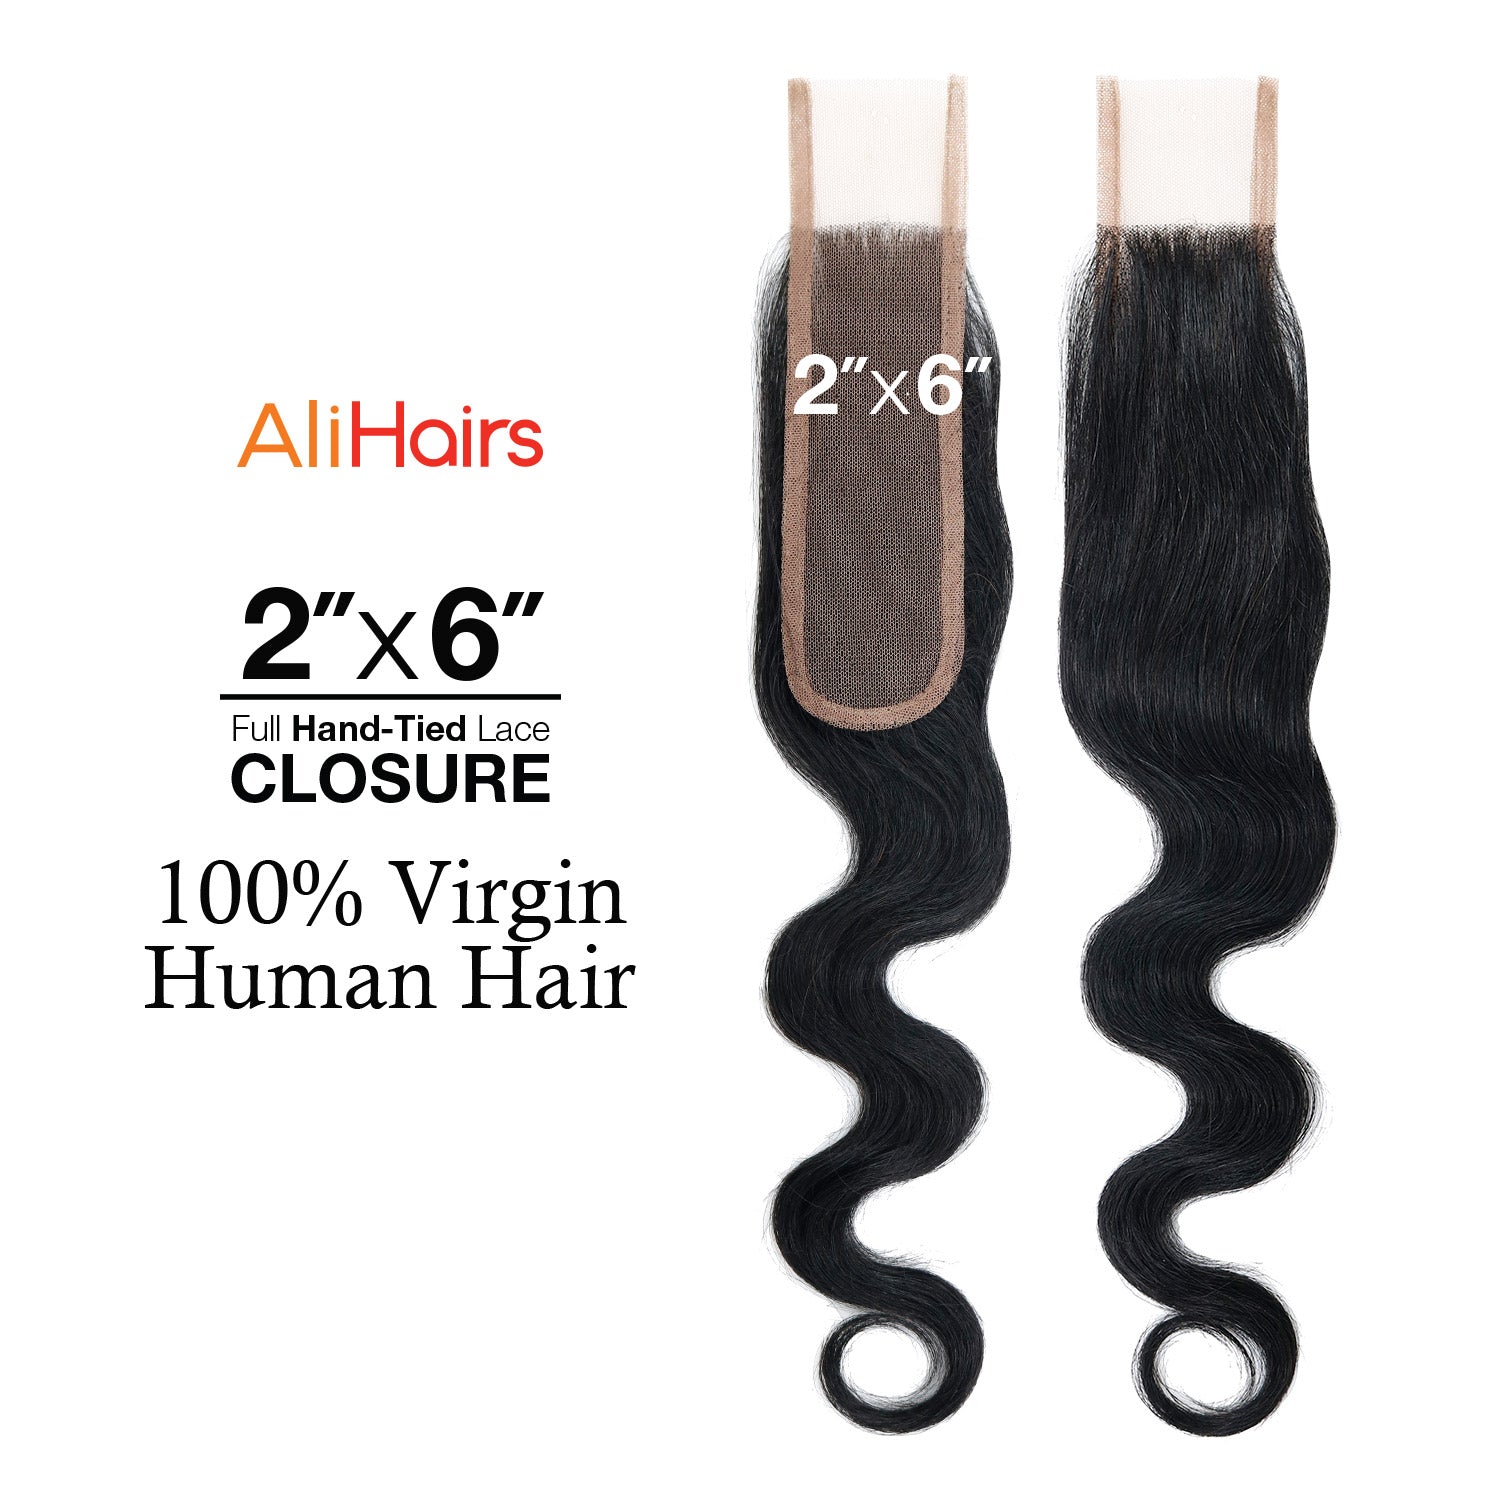 2x6, HD Lace, Closure, Parting, Parting Closure, Body Wave